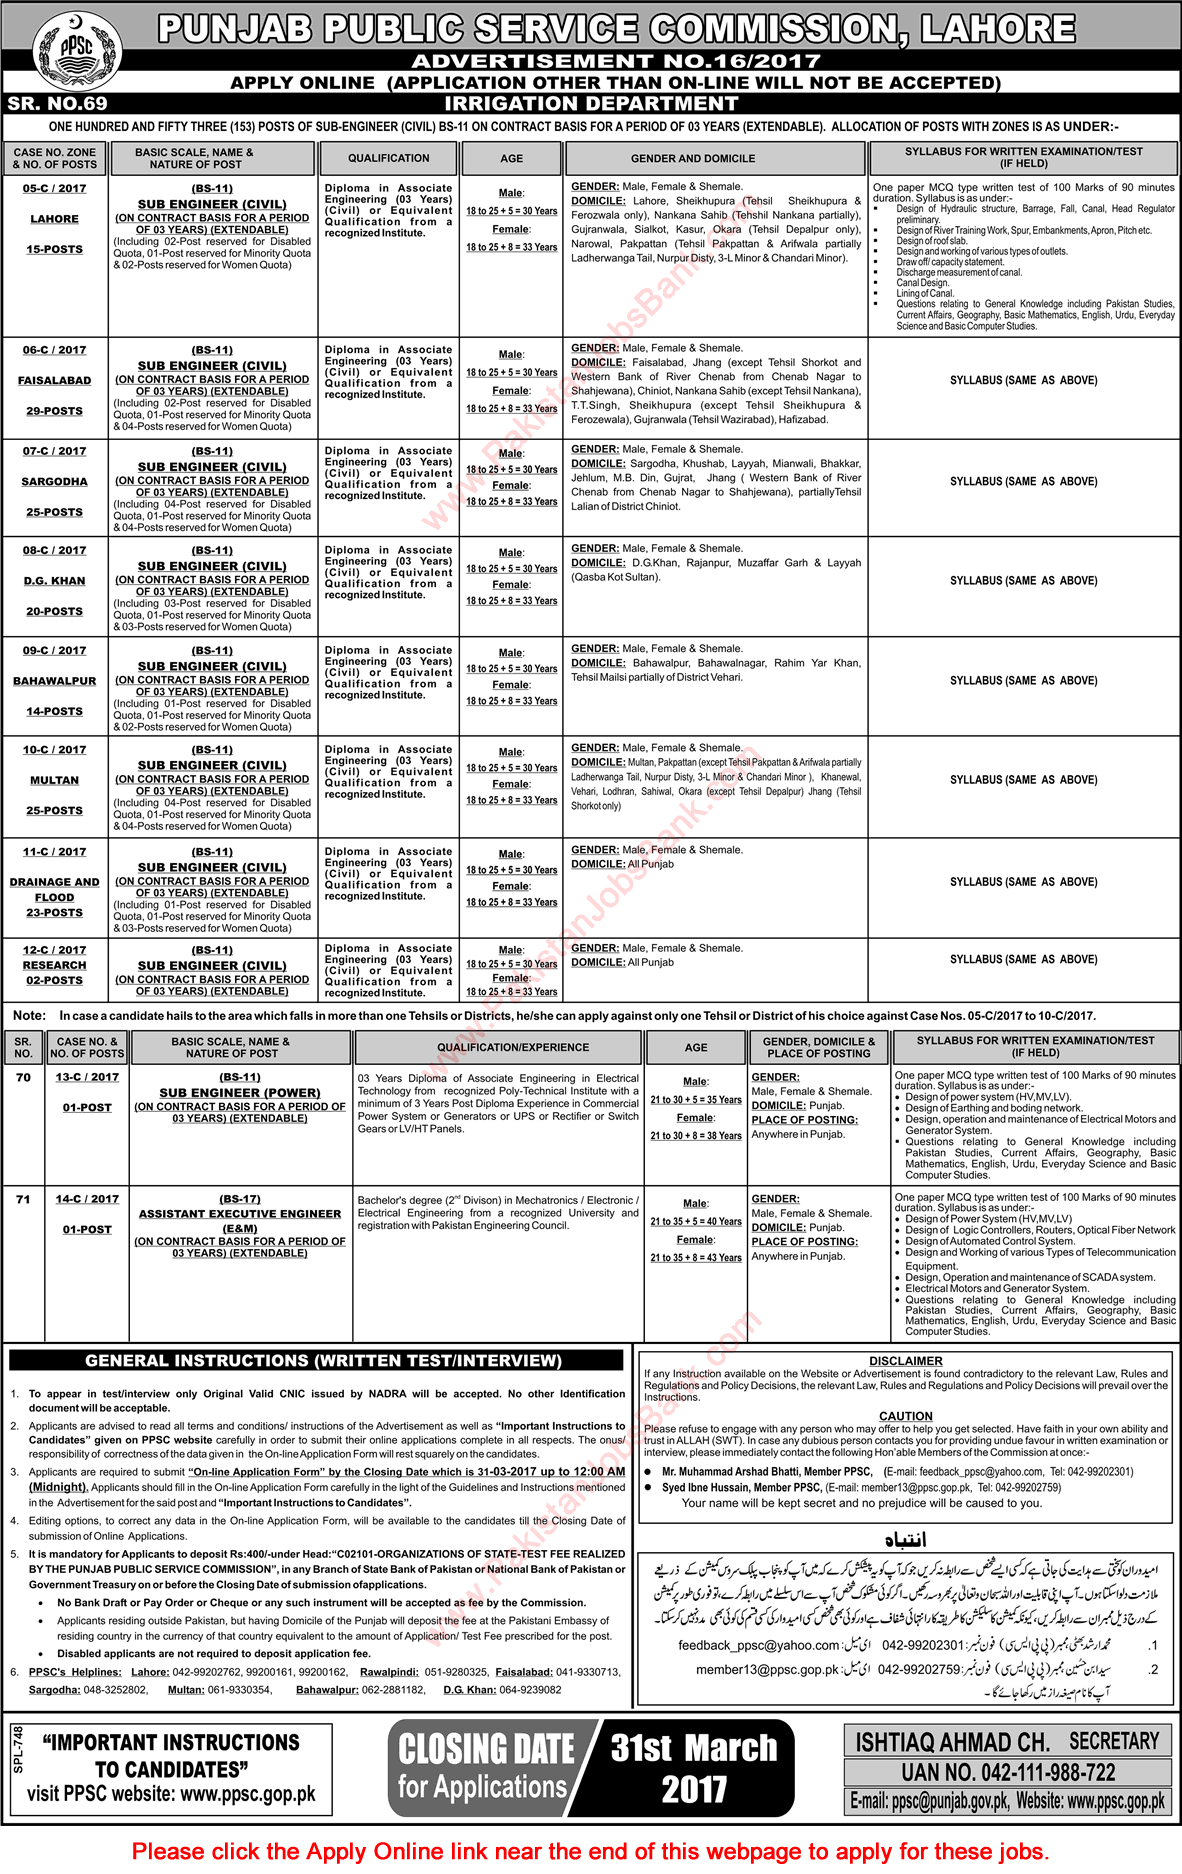 PPSC Jobs March 2017 Consolidated Advertisement No 16/2017 Apply Online Latest / New